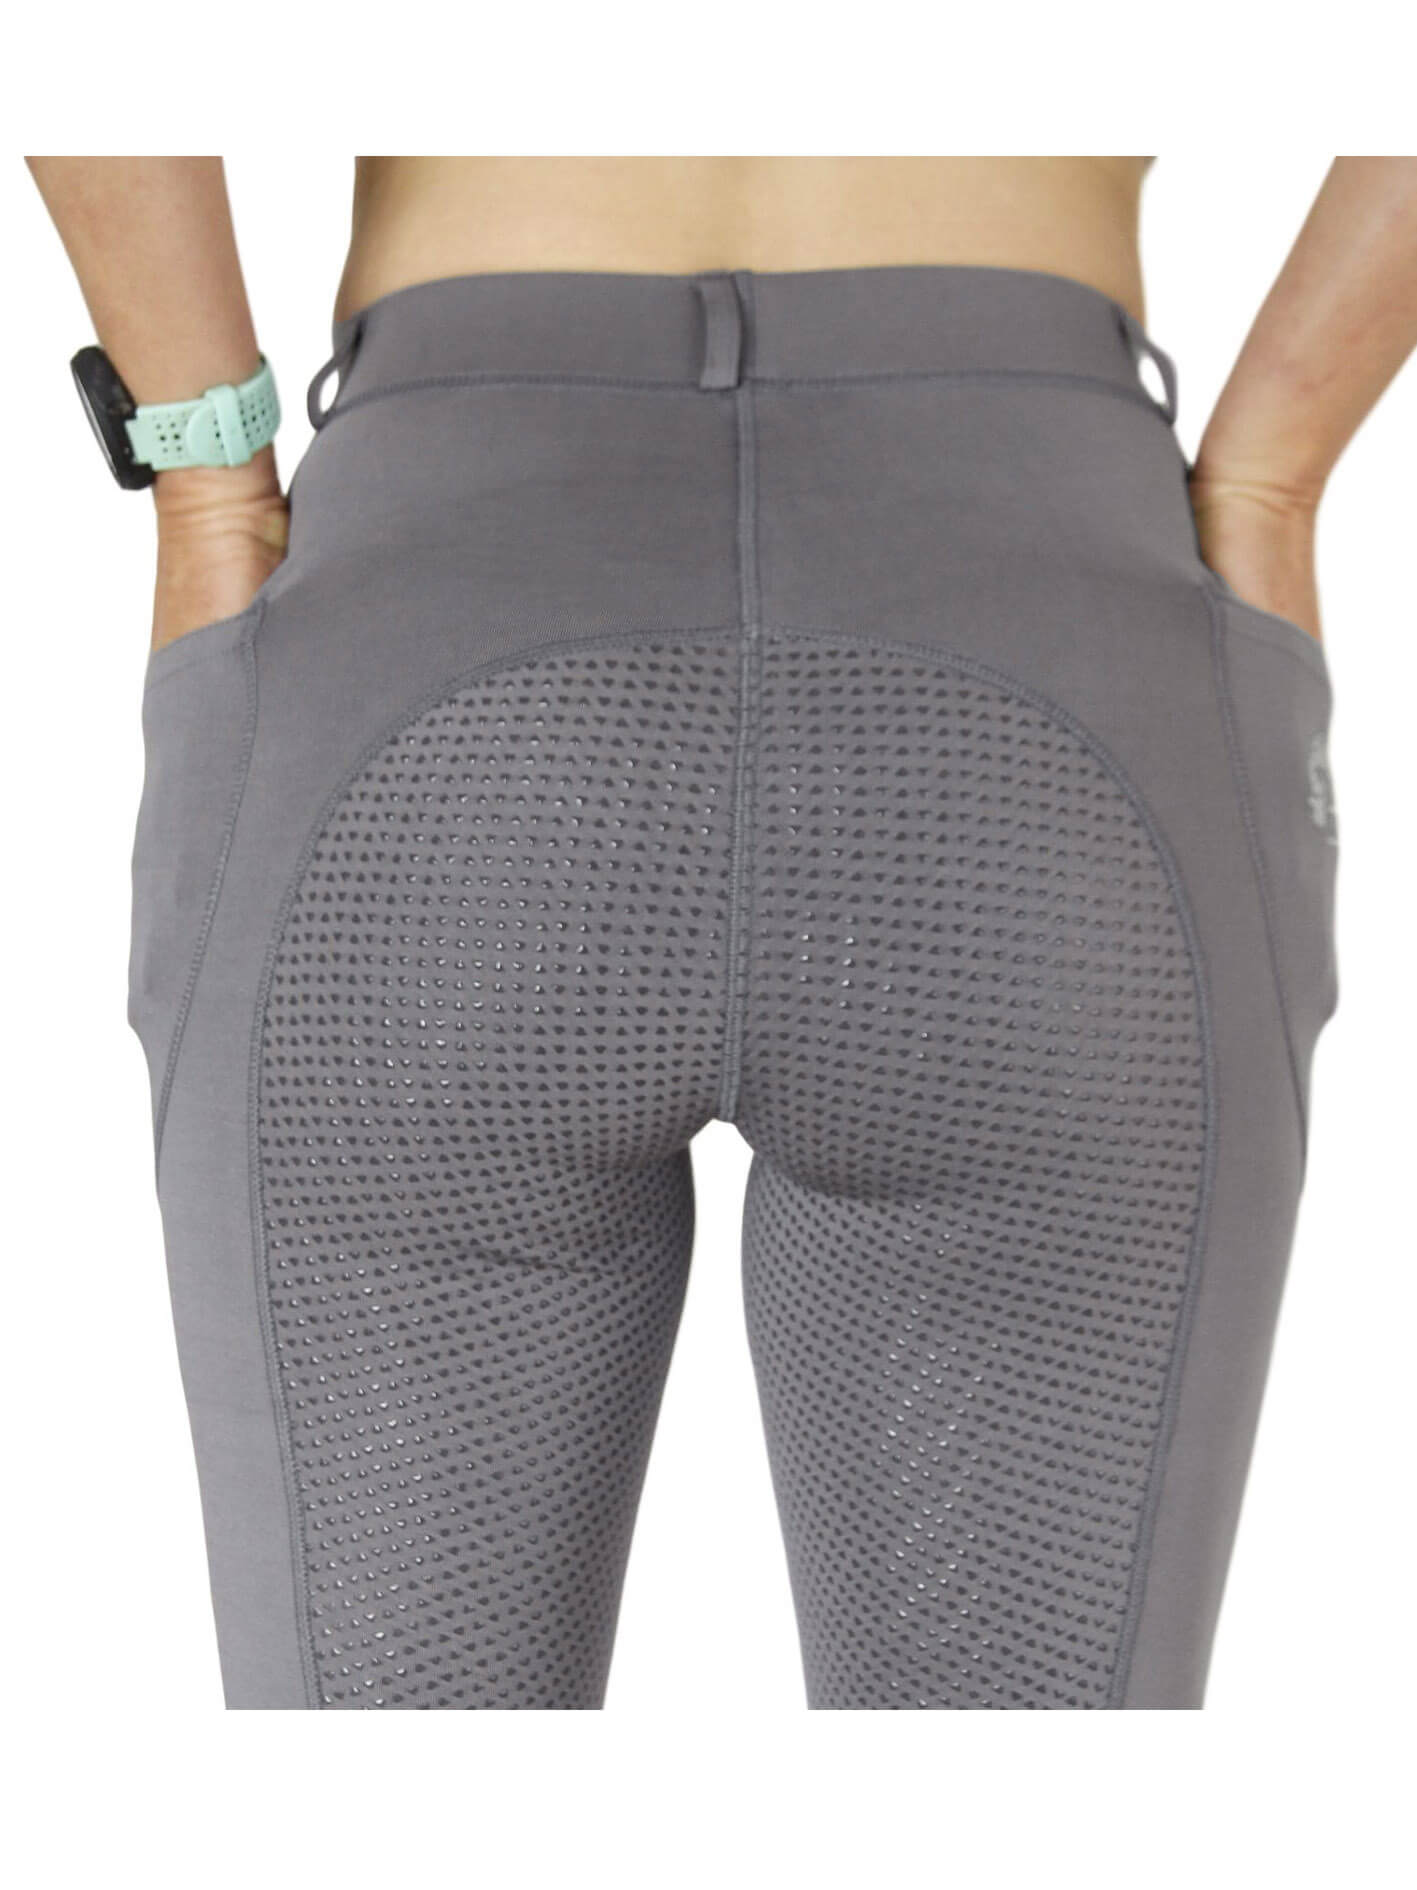 Person wearing grey ventilated horse riding tights, rear view.